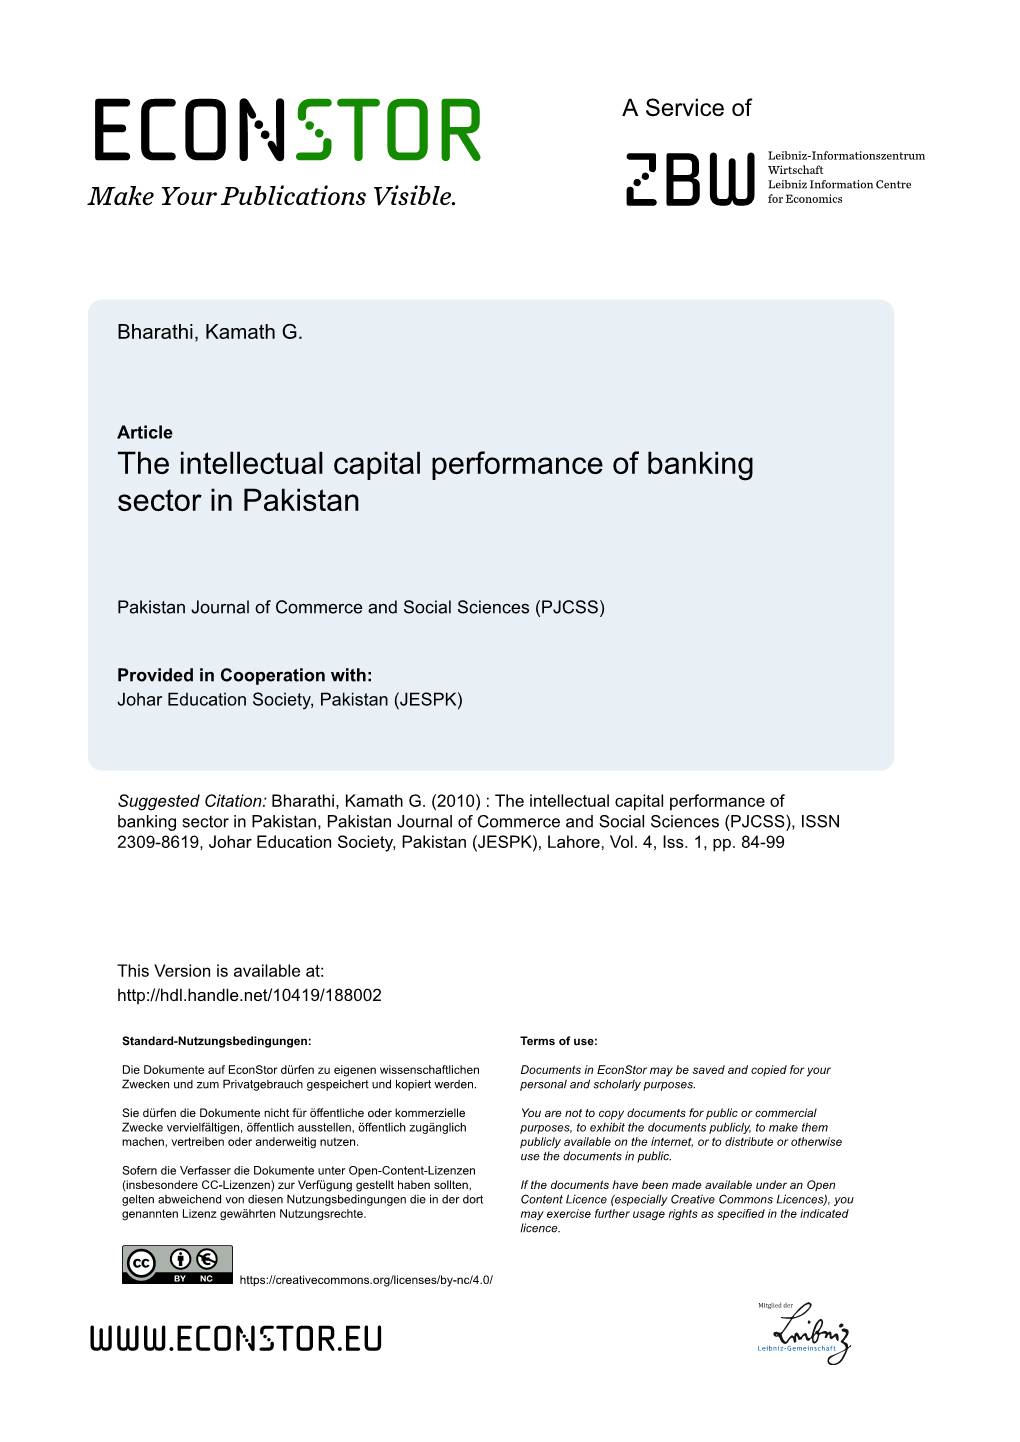 The Intellectual Capital Performance of Banking Sector in Pakistan